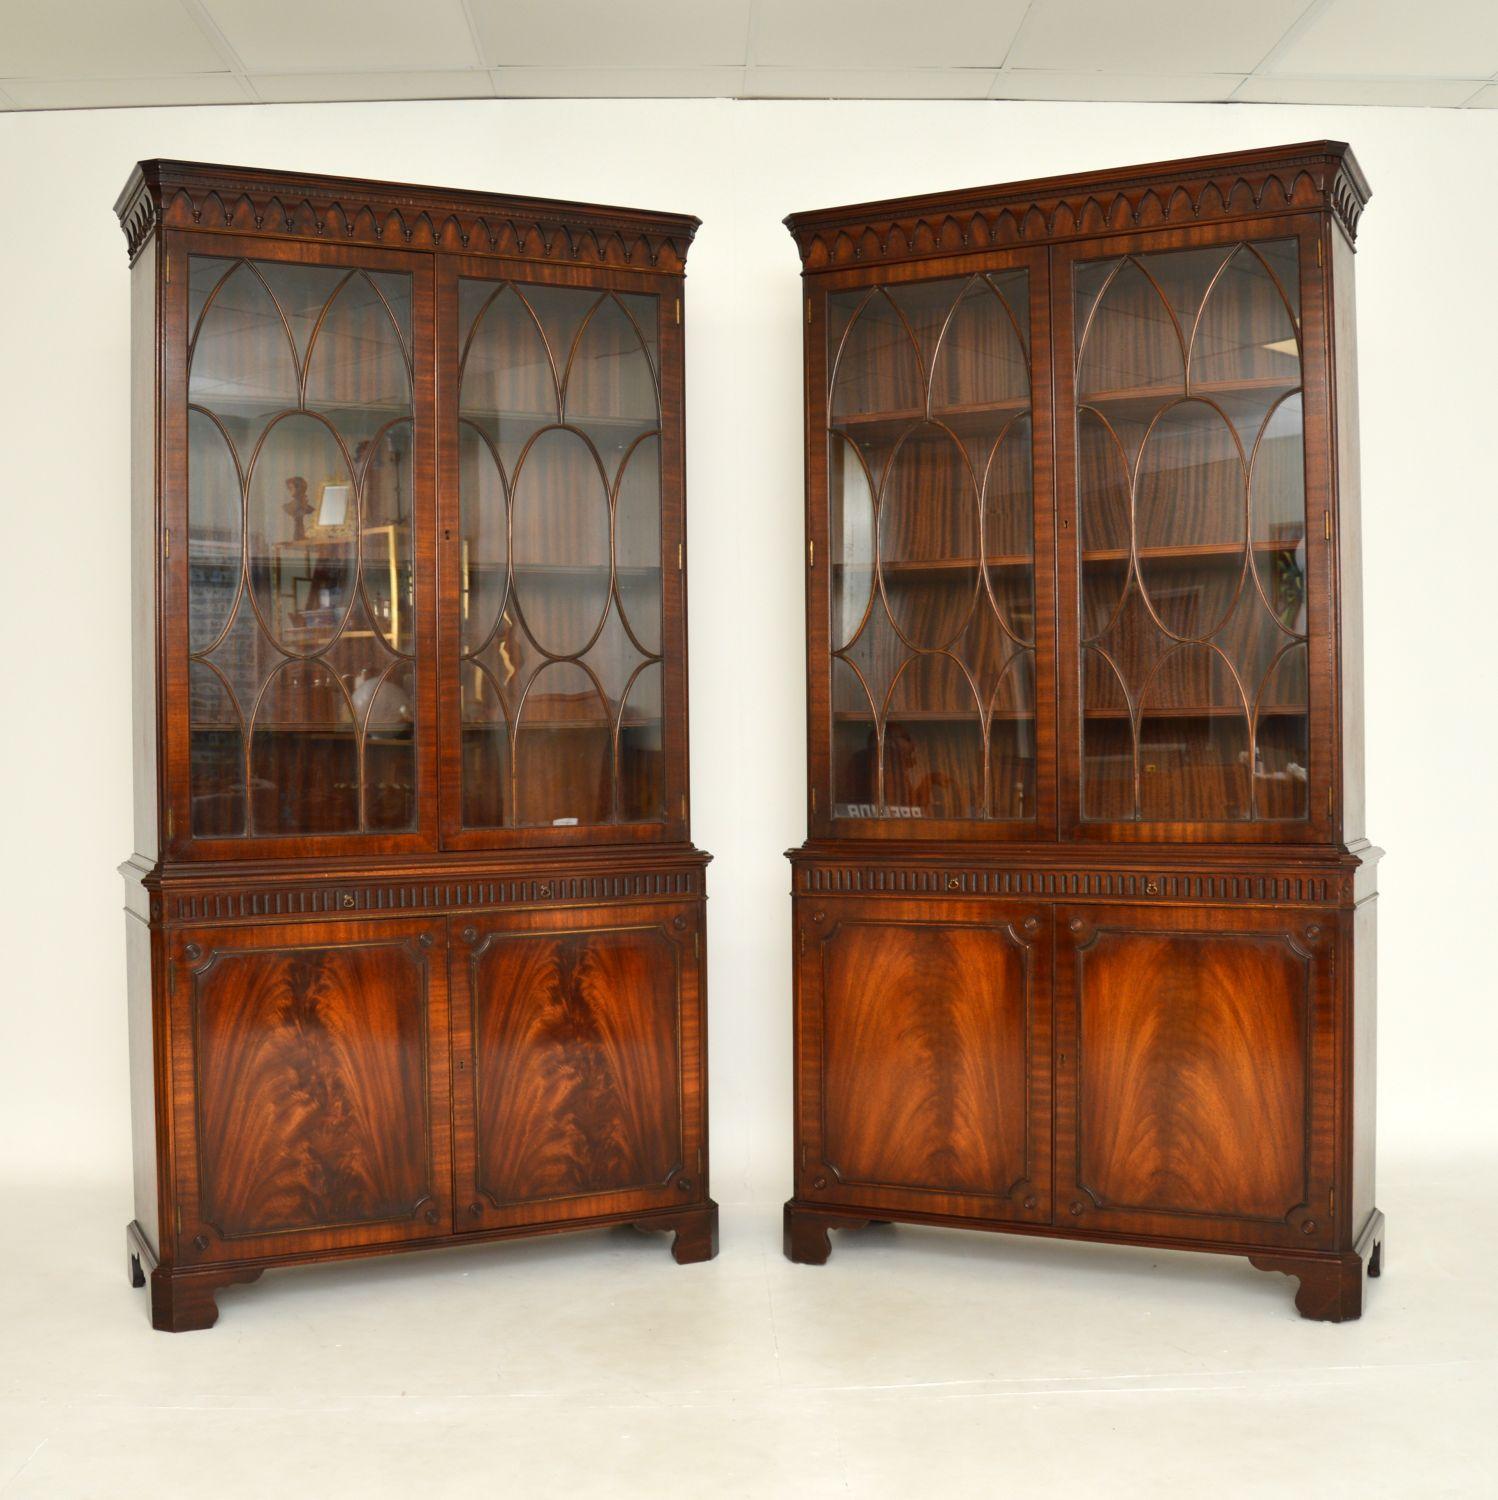 A superb pair of astral glazed bookcases. These are in the antique Georgian style, they were made in England and date from around the 1930-1950’s.

The quality is amazing, these are very impressive and offer lots of storage space. The upper astral